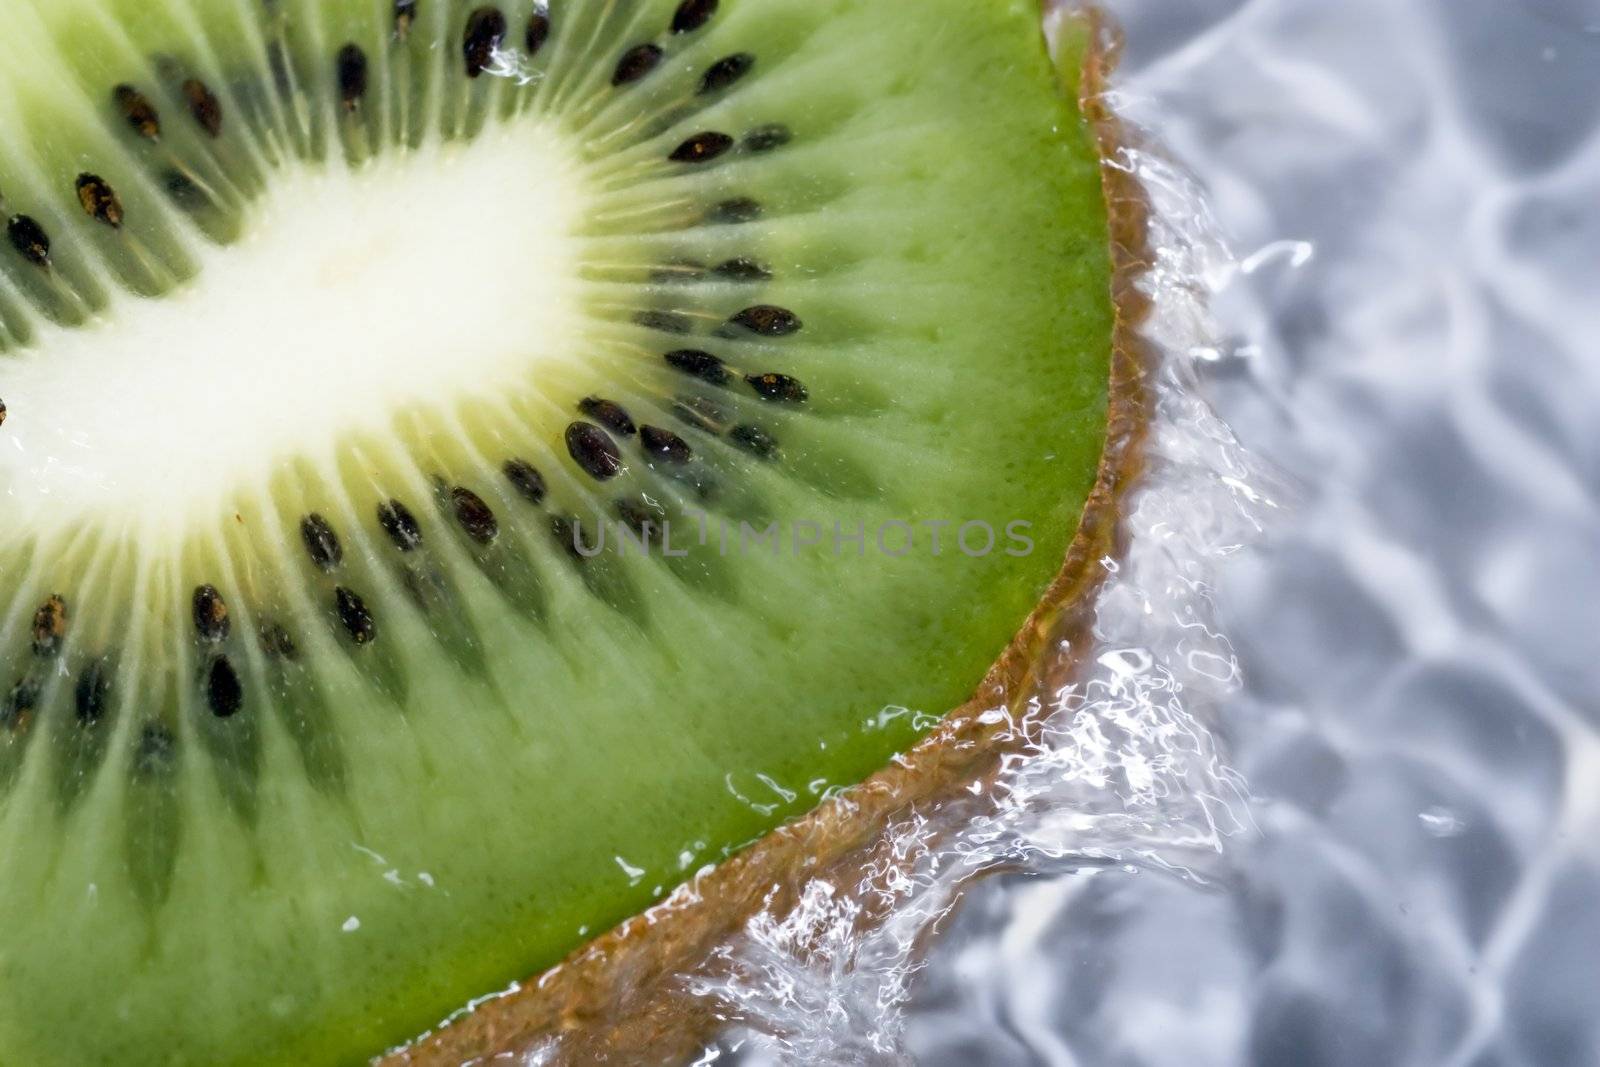 Kiwi under running water, with water running over sides.